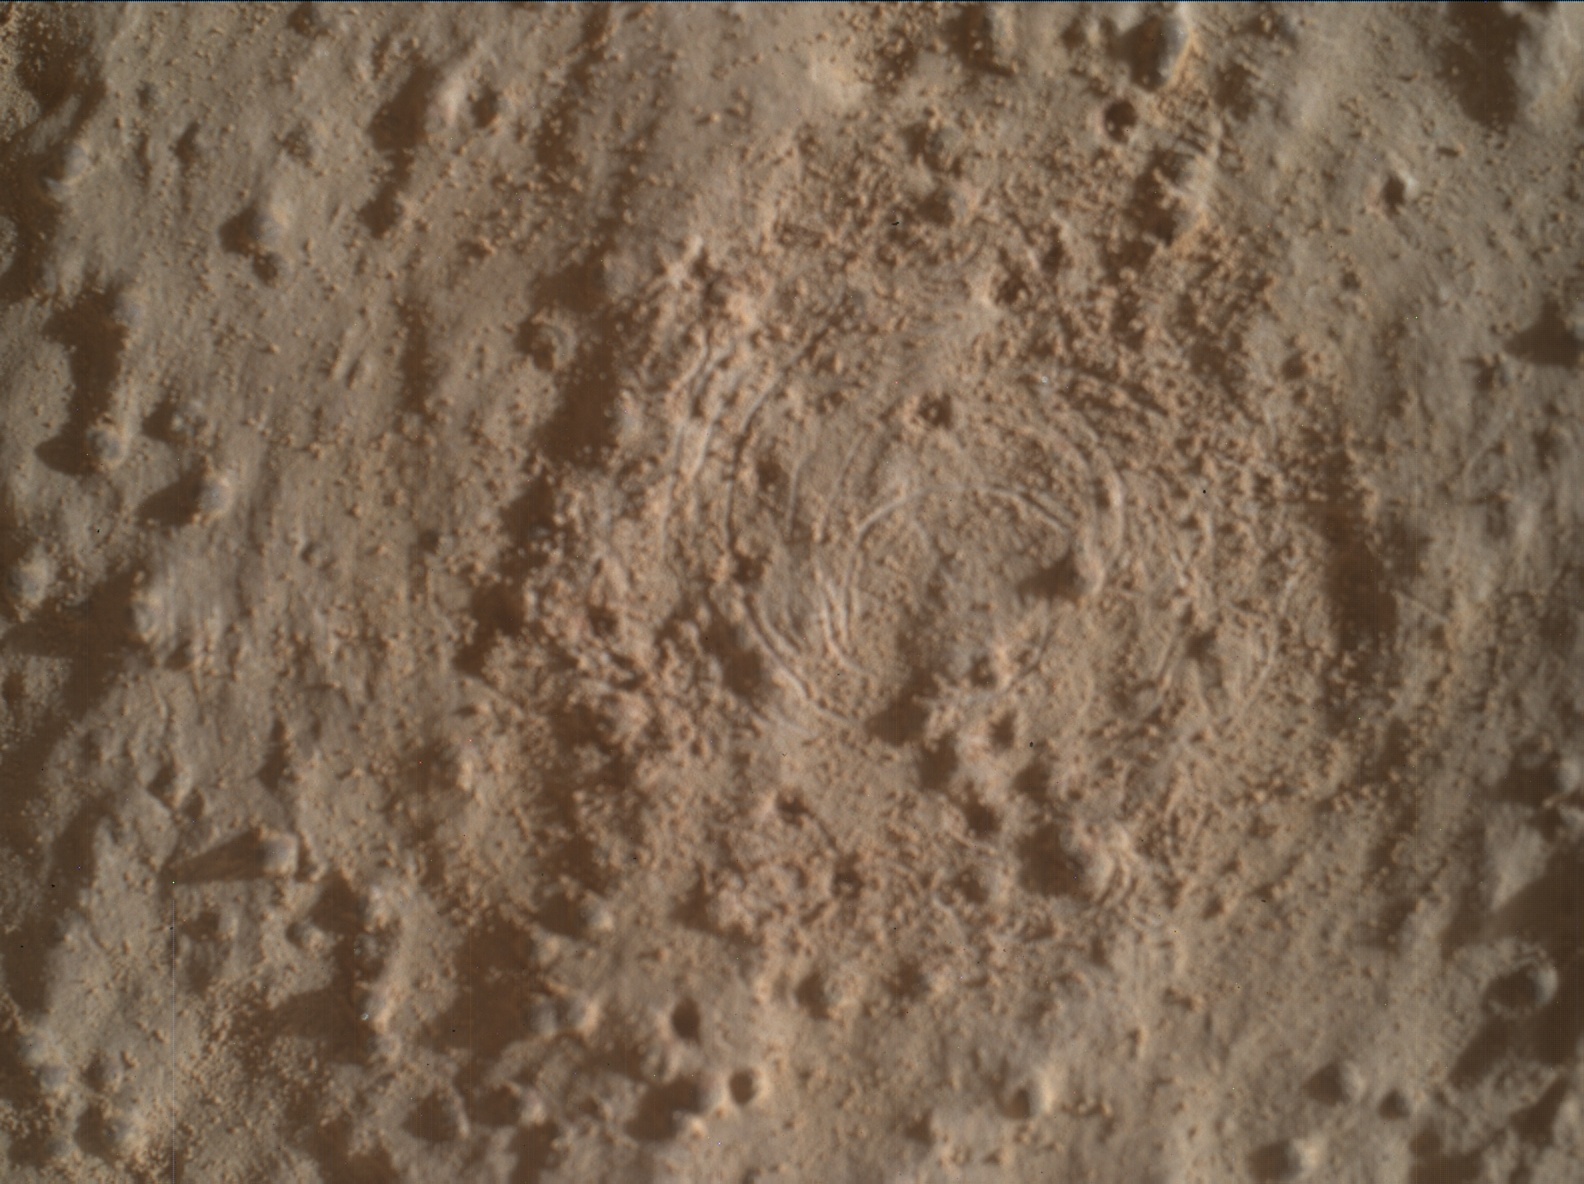 Nasa's Mars rover Curiosity acquired this image using its Mars Hand Lens Imager (MAHLI) on Sol 3388